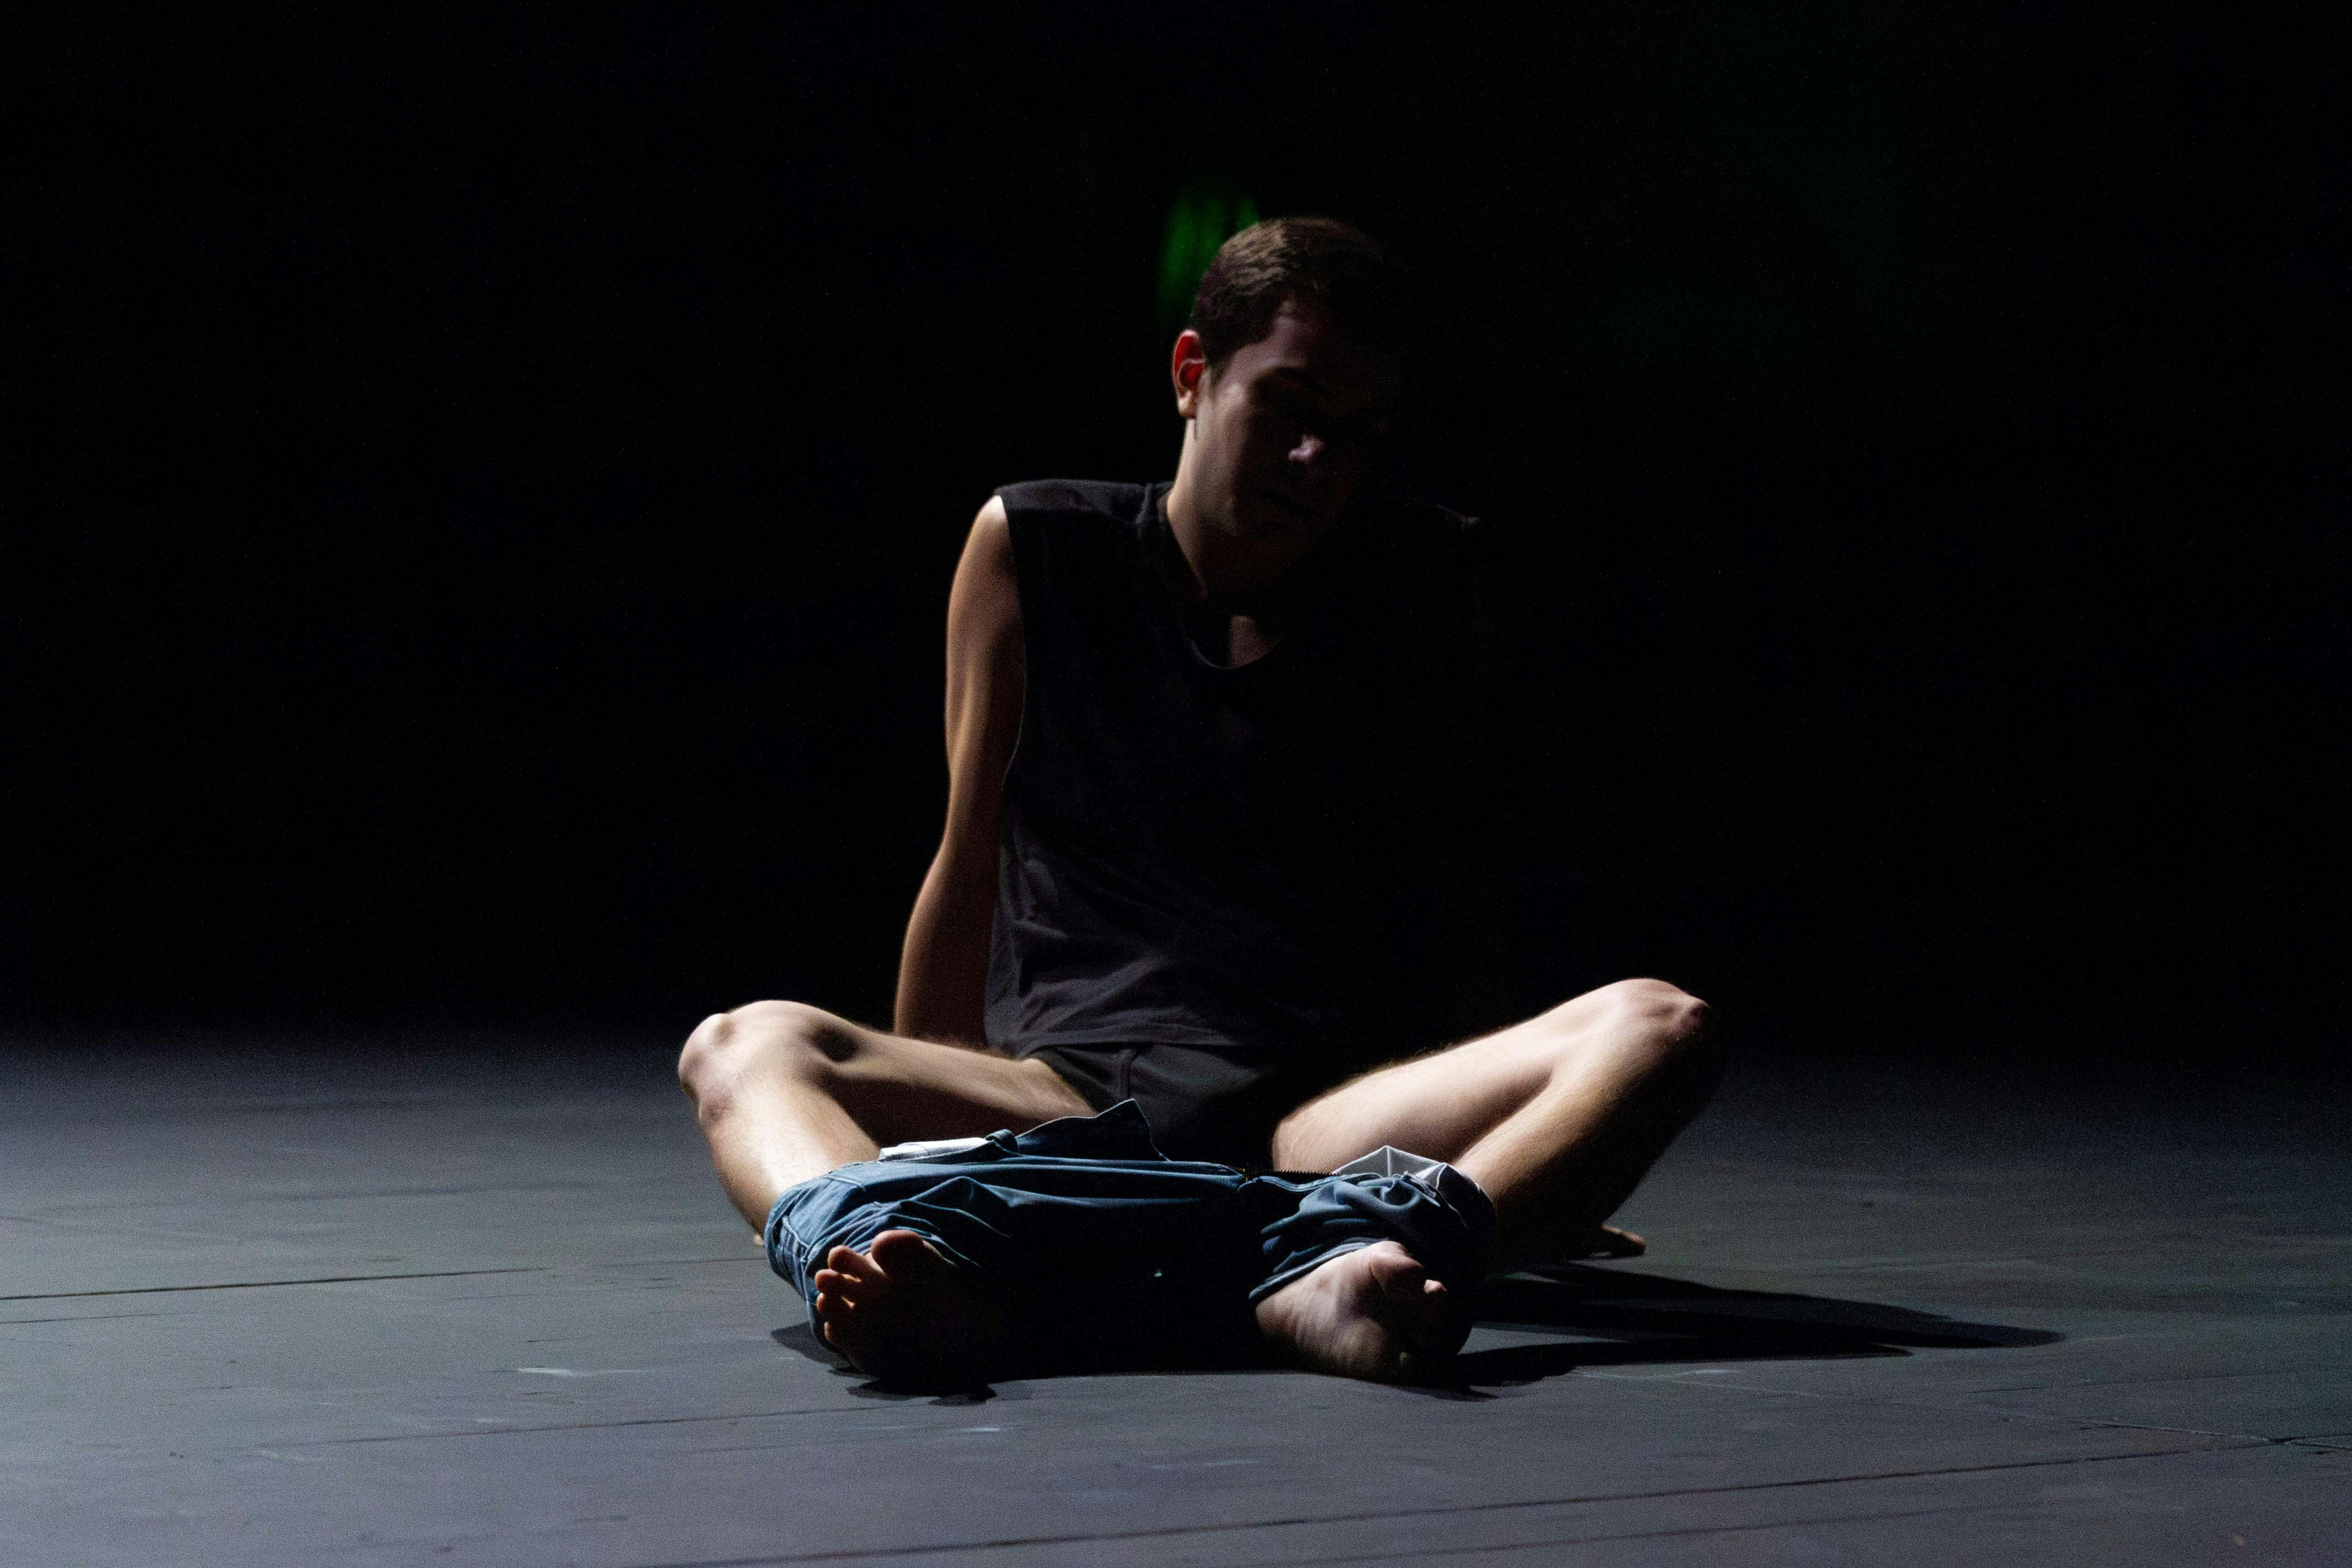 Performer sitting on the floor in the half-light, legs slightly apart; wearing a black shirt and pants pulled down to ankle level.